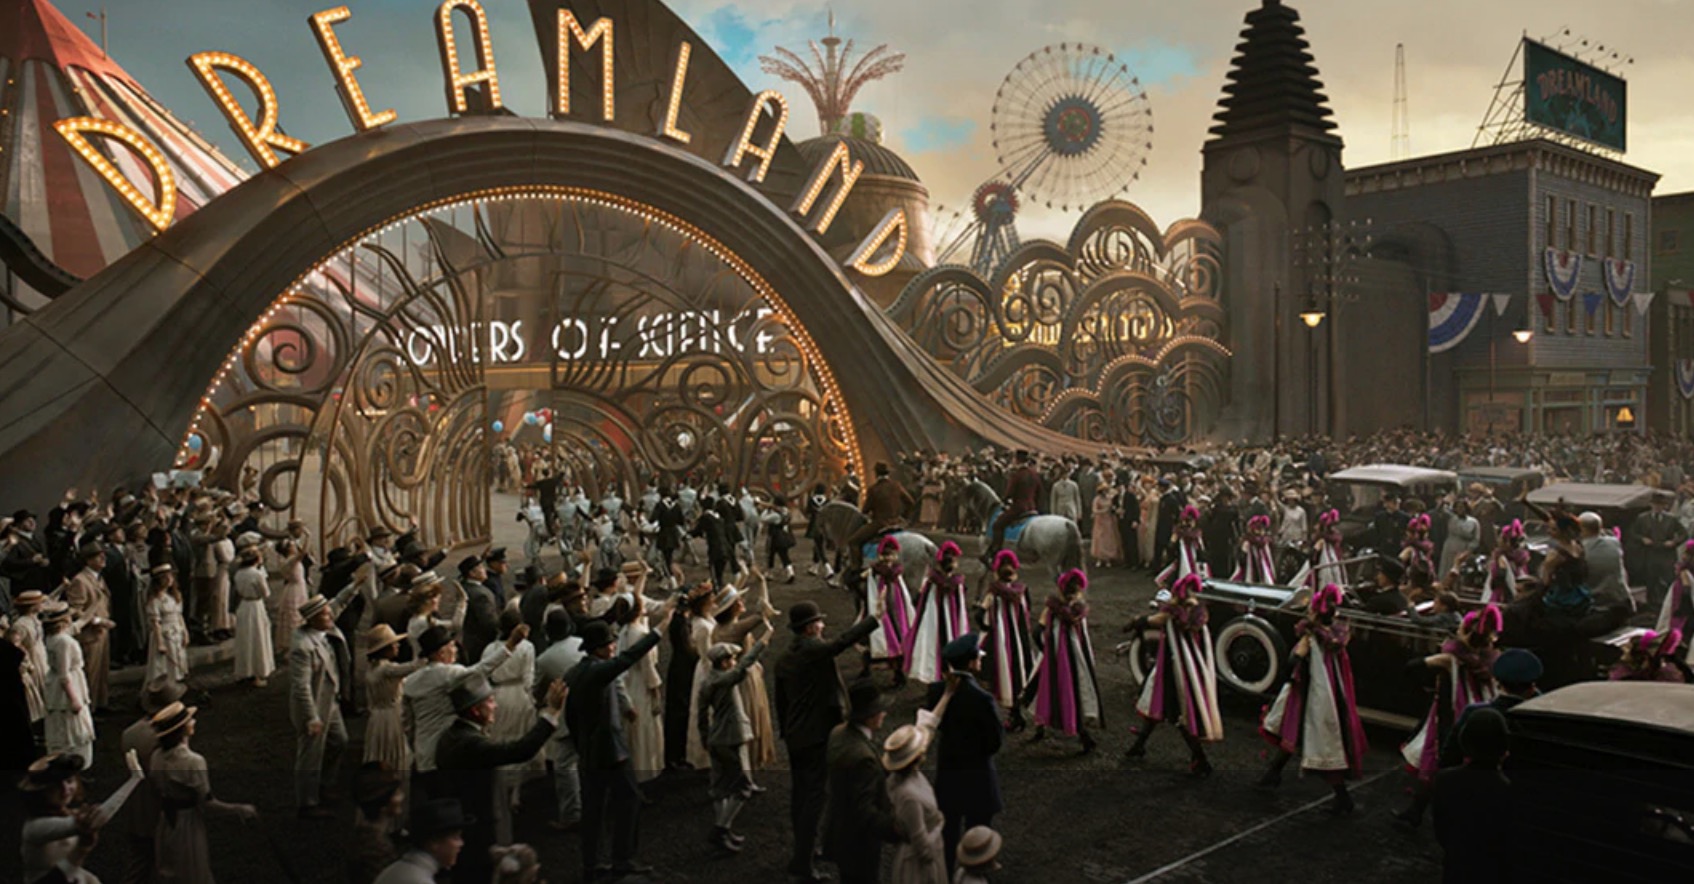 ART OF THE CUT with editor Chris Lebenzon, ACE on "Dumbo" 32